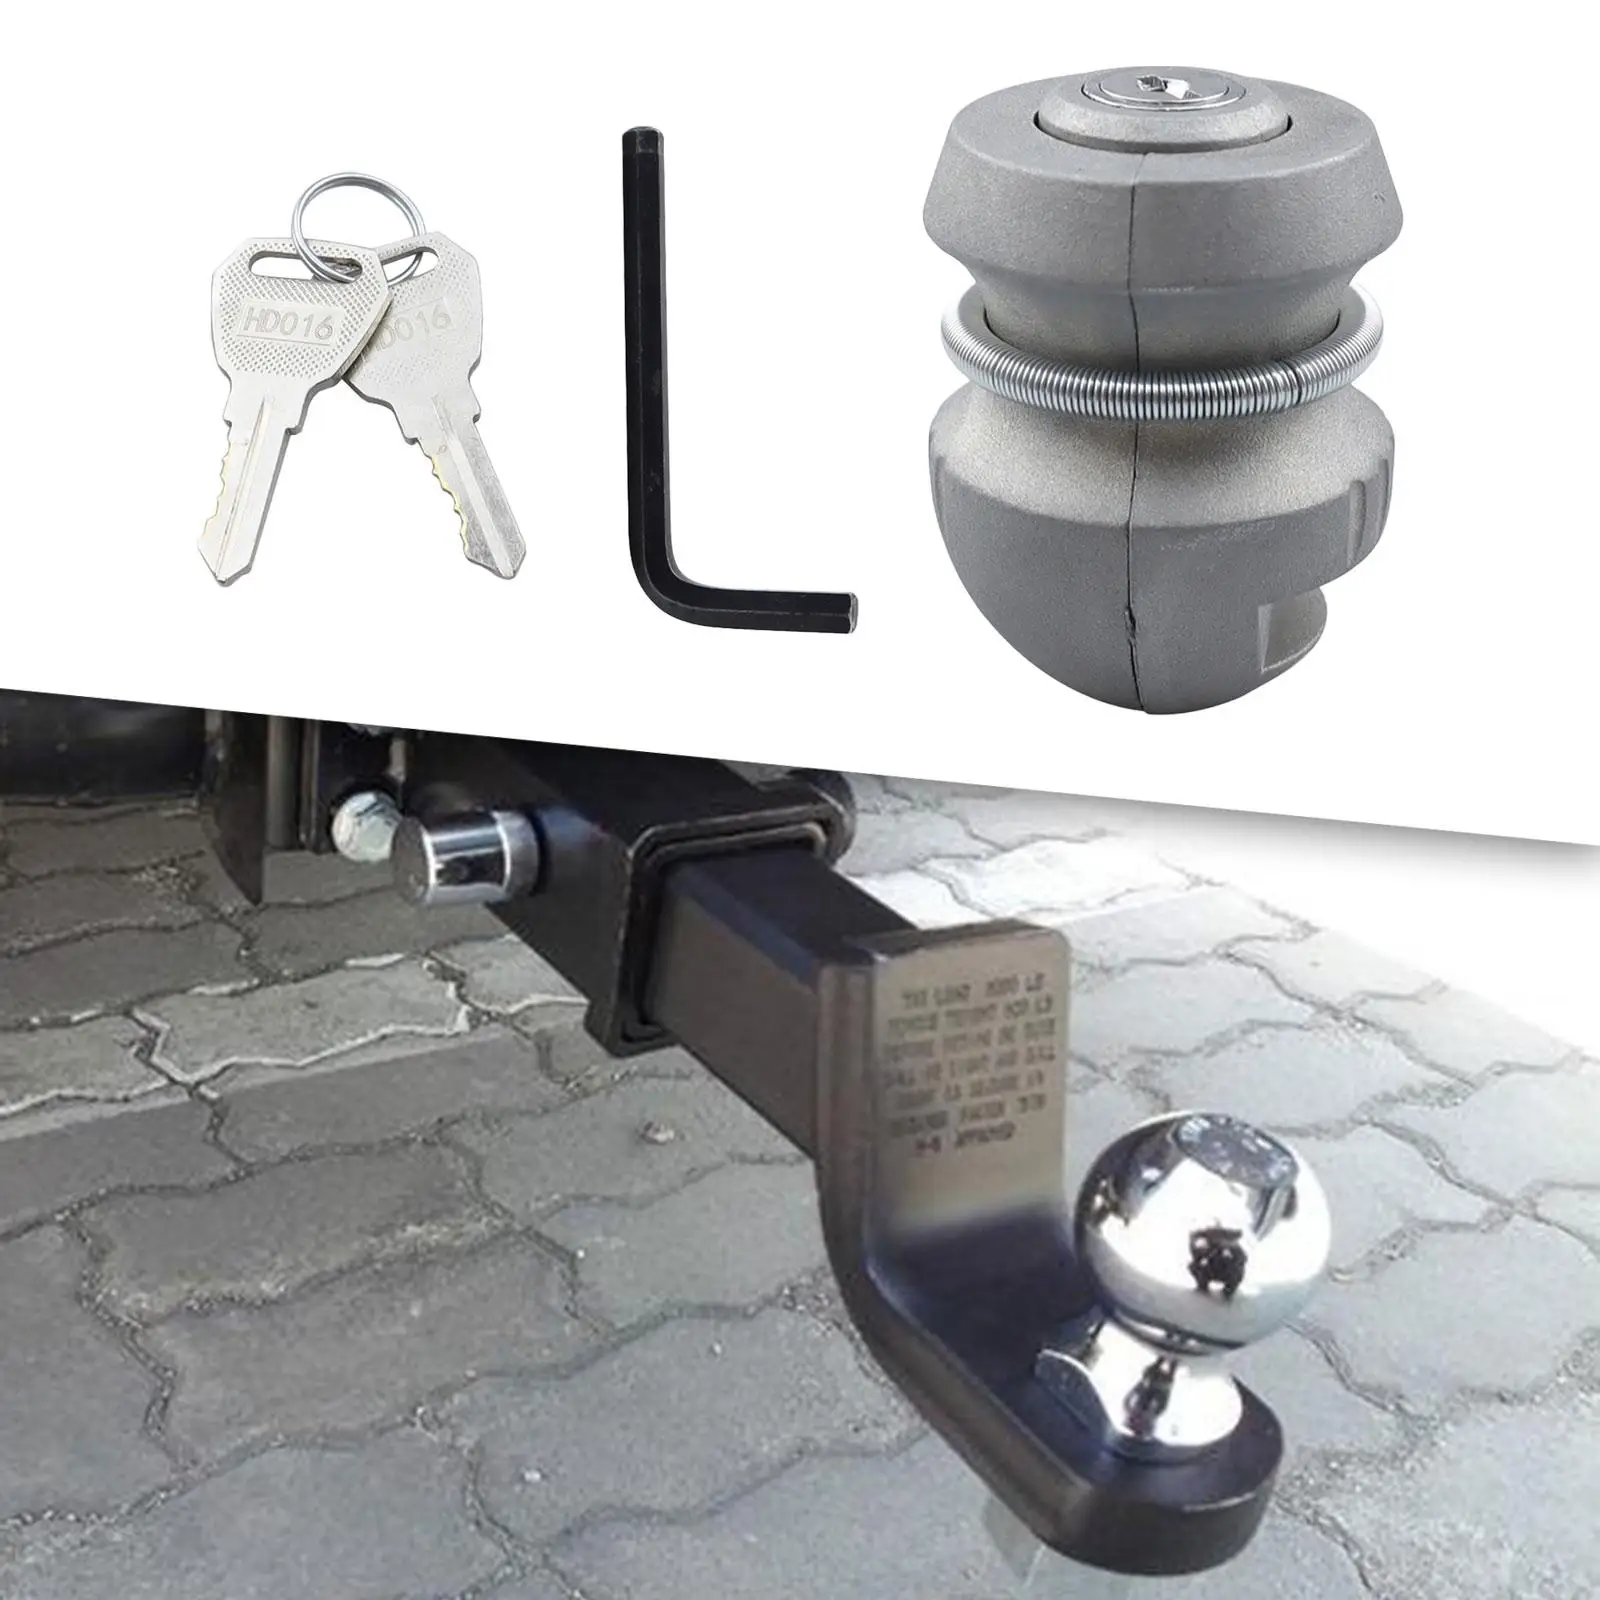 Trailer Part Coupling Lock Trailer Hitch Coupling Tow Ball Lock Tow Hitch Lock Universal Hitch Lock for Durable